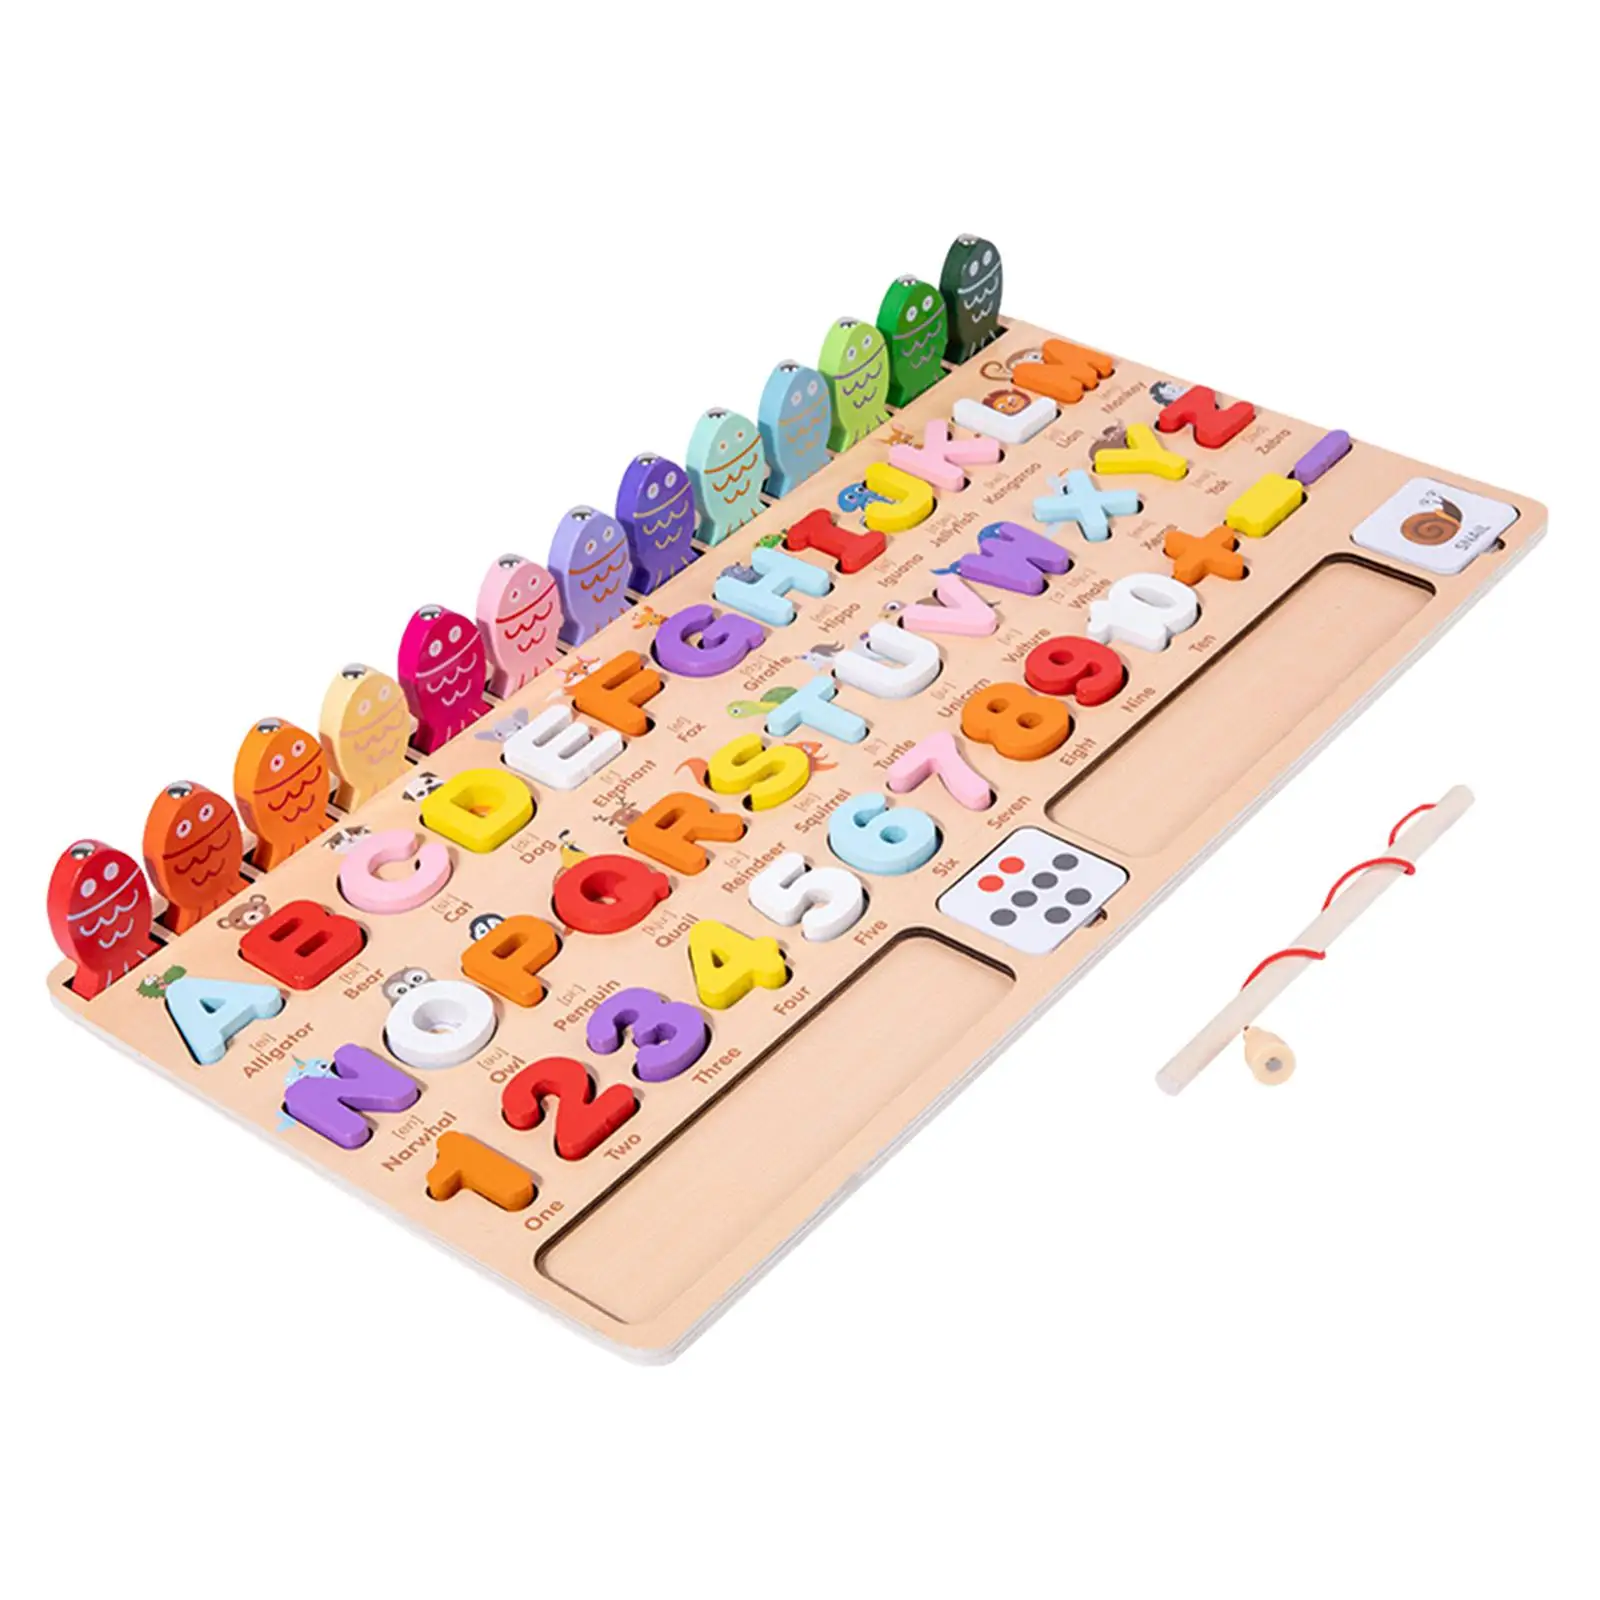 Wooden ABC Fishing Game Toy with Magnet Poles for Kindergarten Toddlers